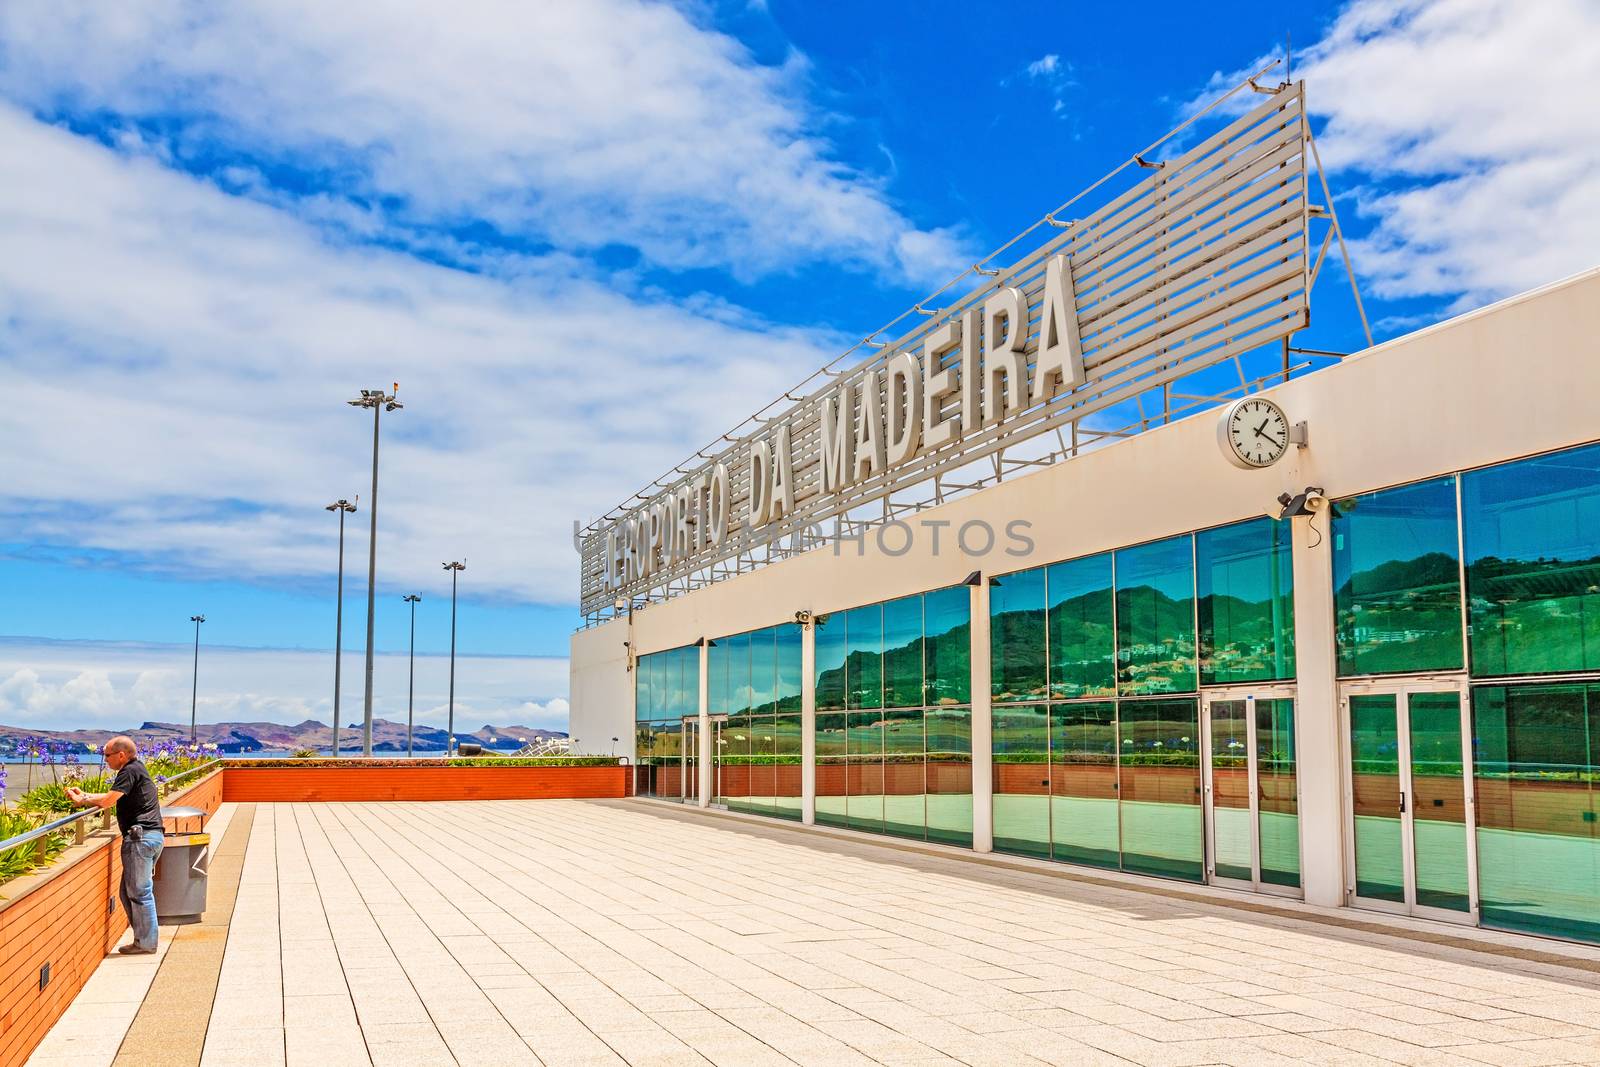 Madeira Airport with lettering, exterior view by aldorado